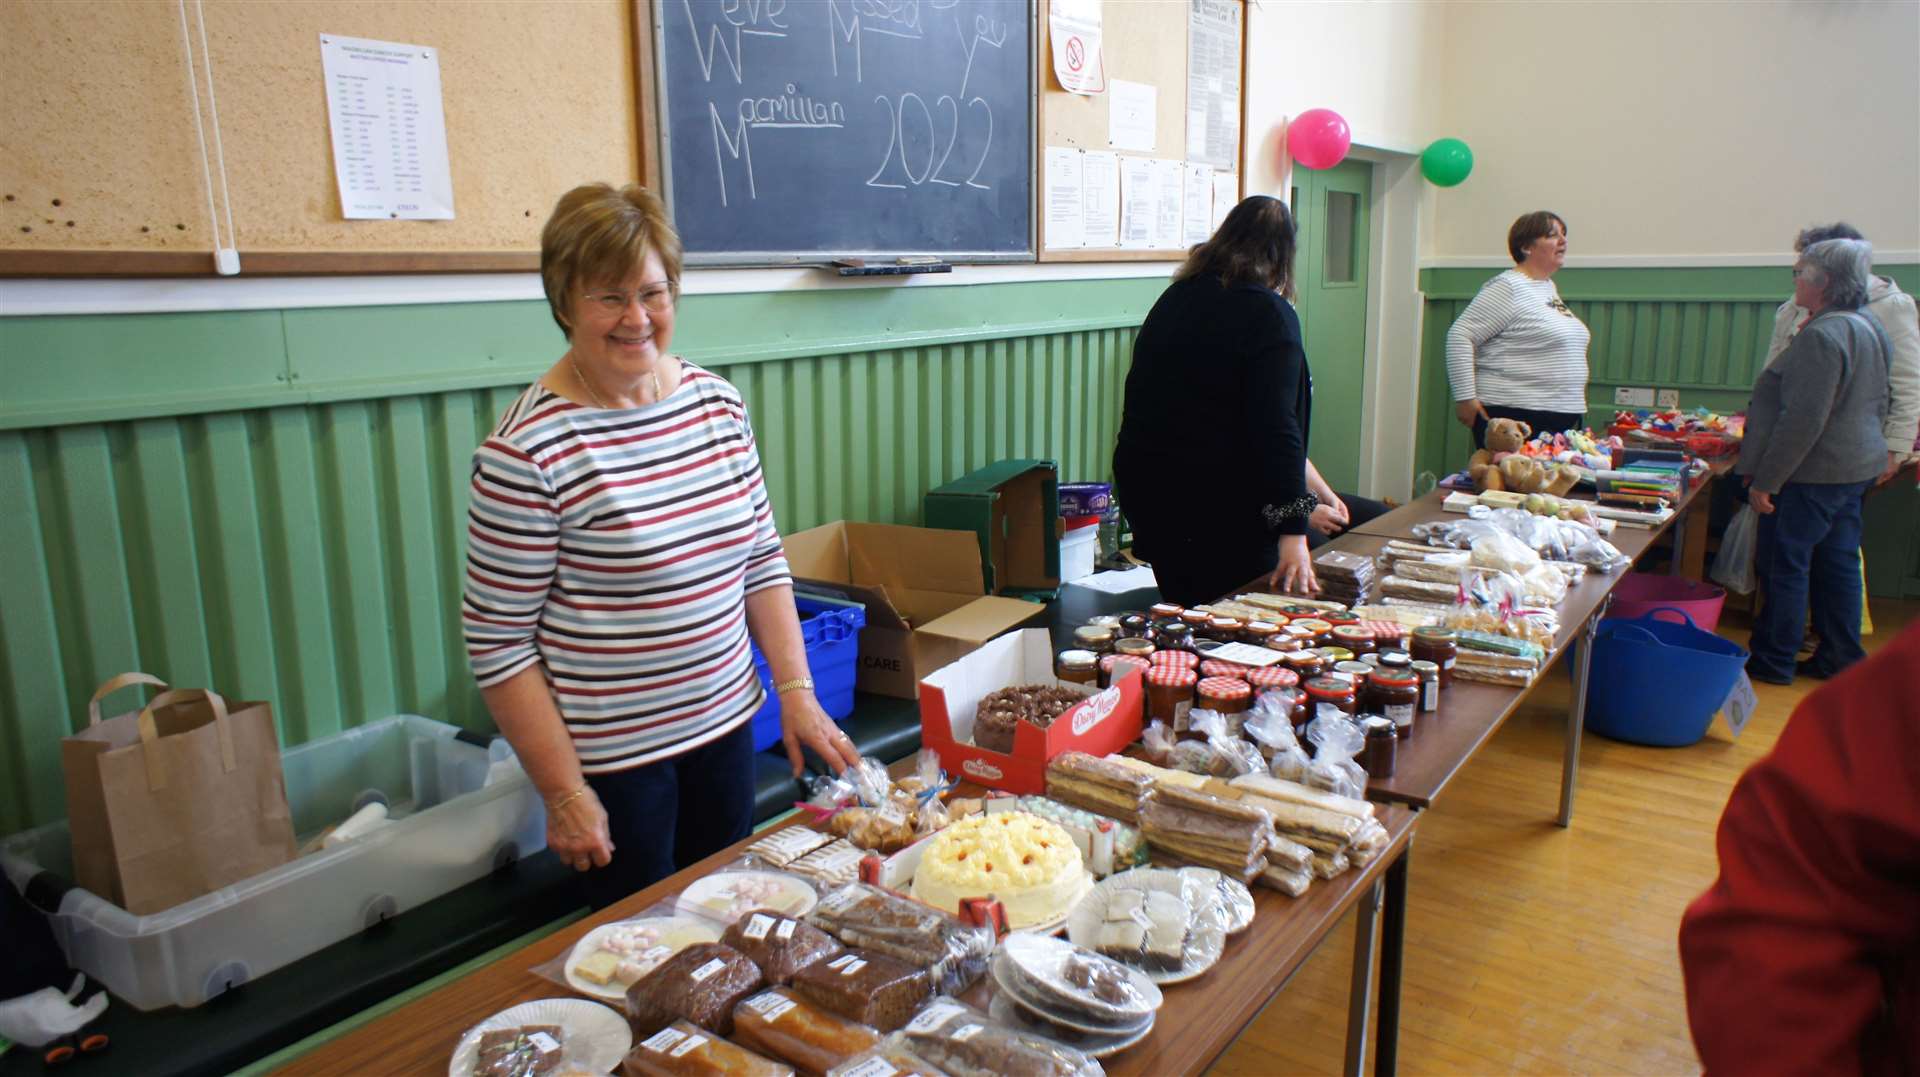 One of several stalls at the event with home baking for sale. Picture: DGS